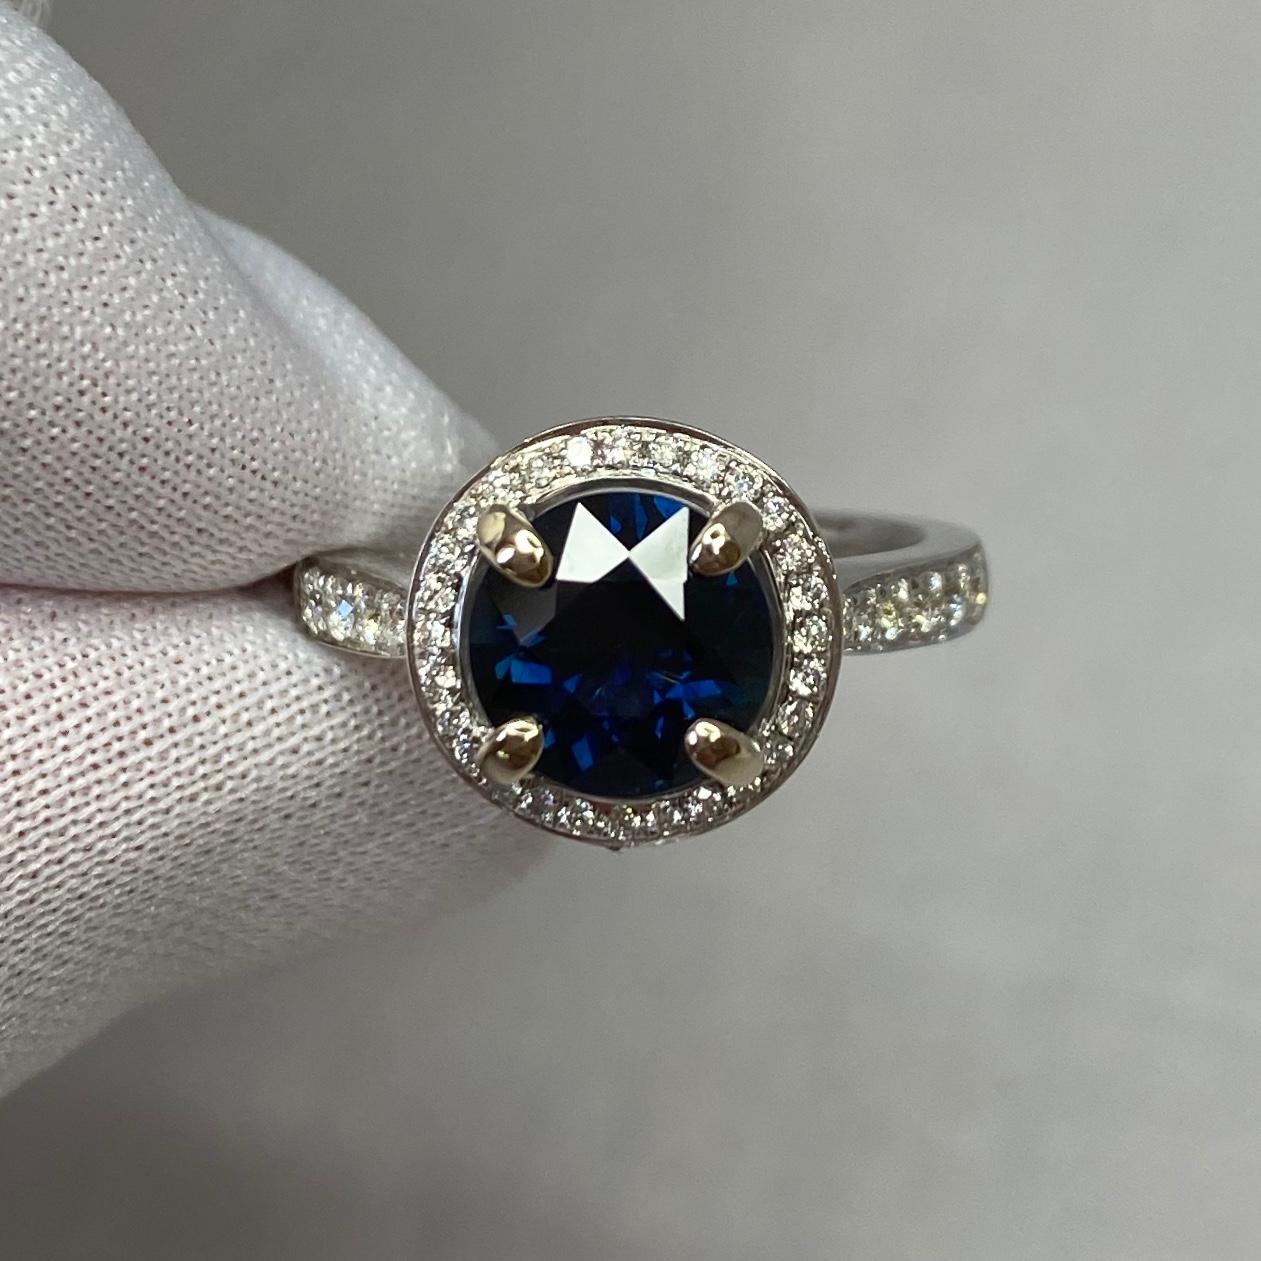 Stunning natural deep blue sapphire set in a fine 18k white gold diamond halo ring.
2.00 carat centre sapphire with a beautiful deep blue colour and excellent clarity. Australian in origin.

The sapphire has an excellent quality cut and polish,